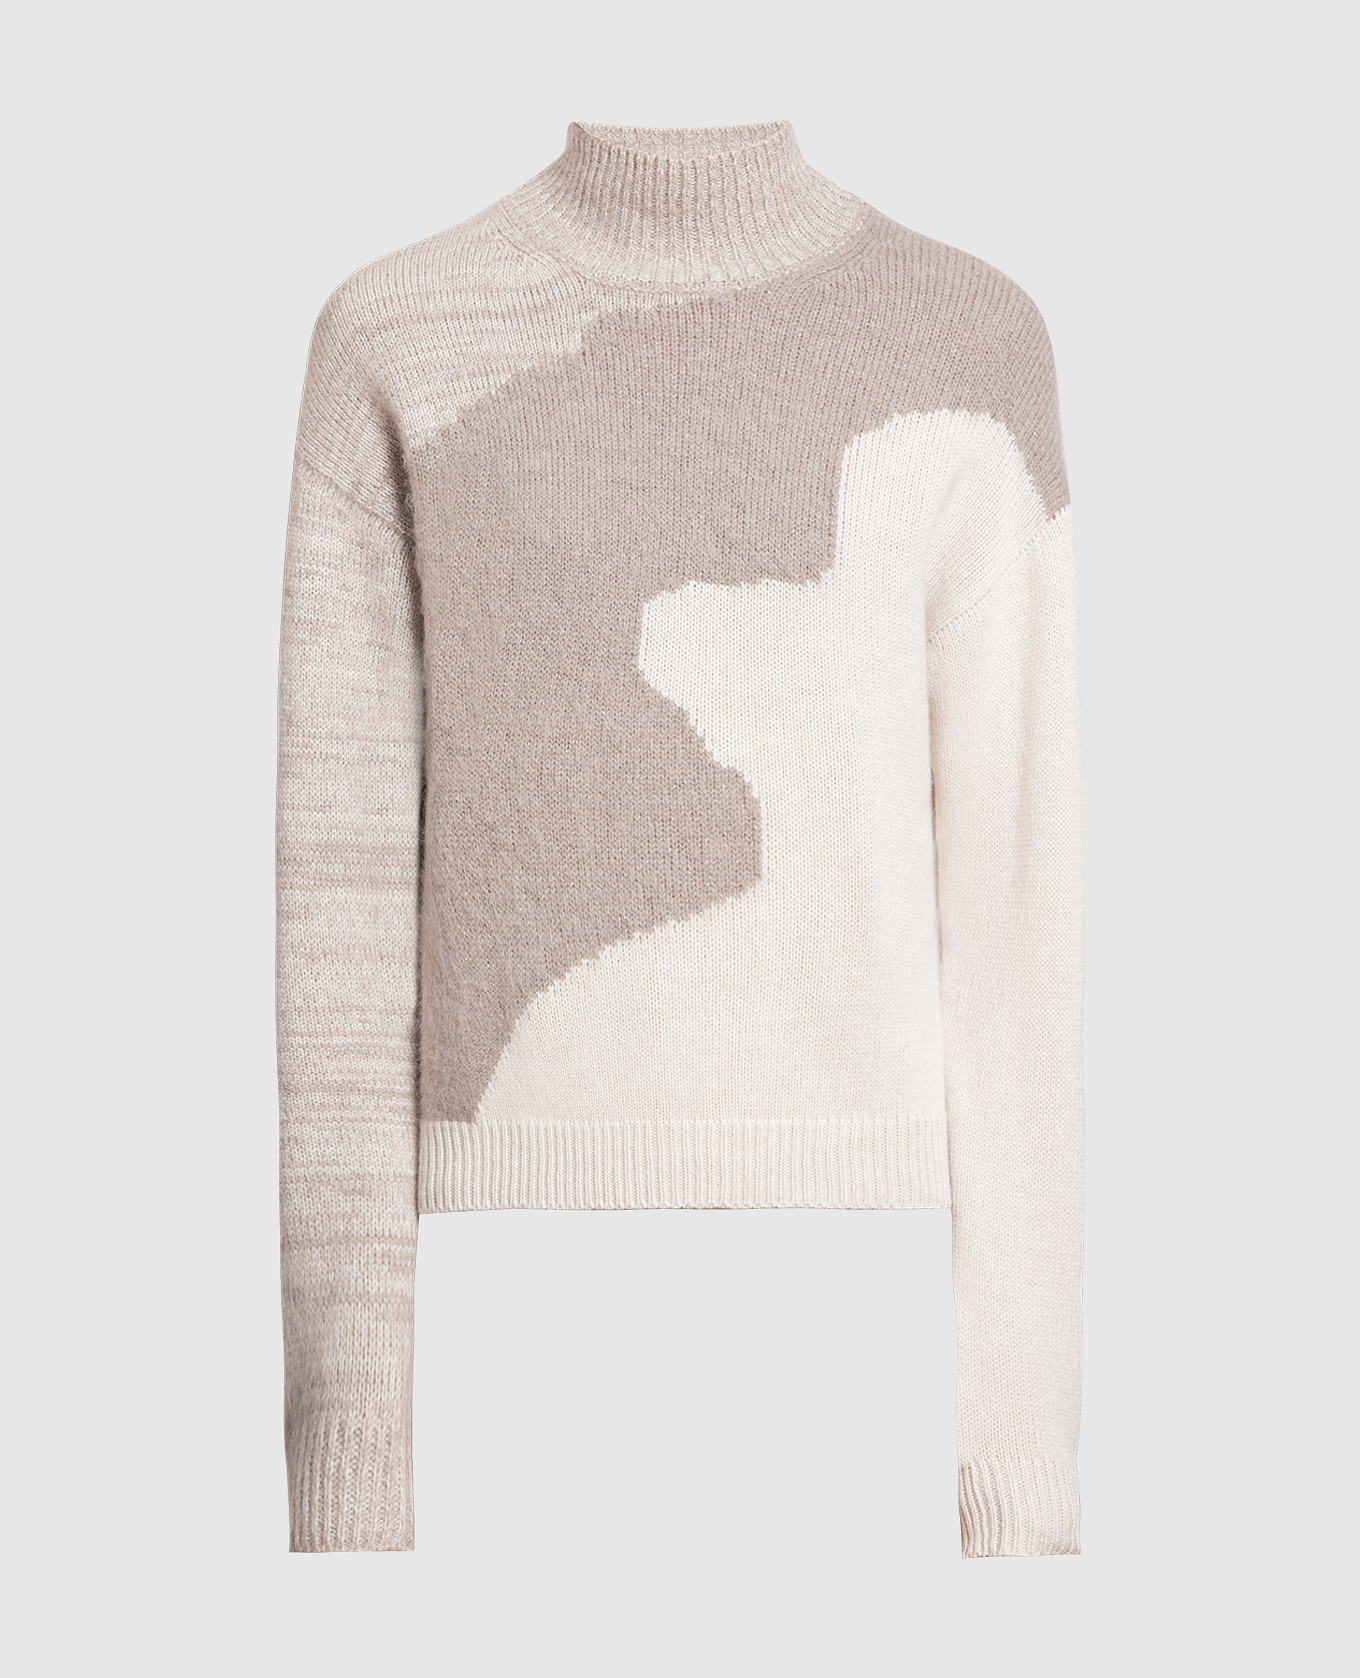 Beige wool, silk and cashmere sweater with a pattern